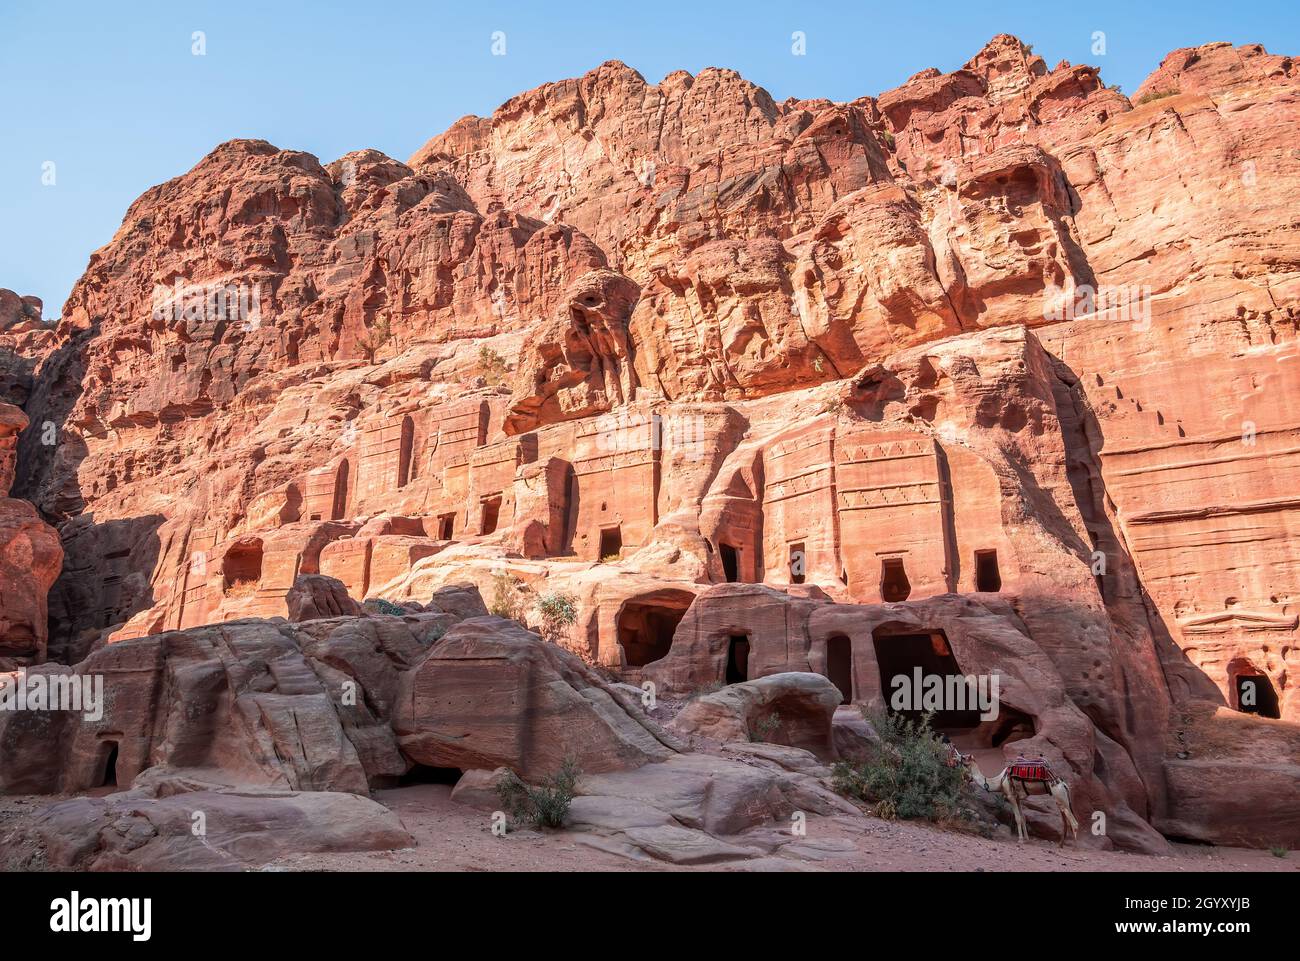 Tomb of 'Unayshu a well preserved tomb carved in red rock in the ancient city of Petra, Jordan Stock Photo